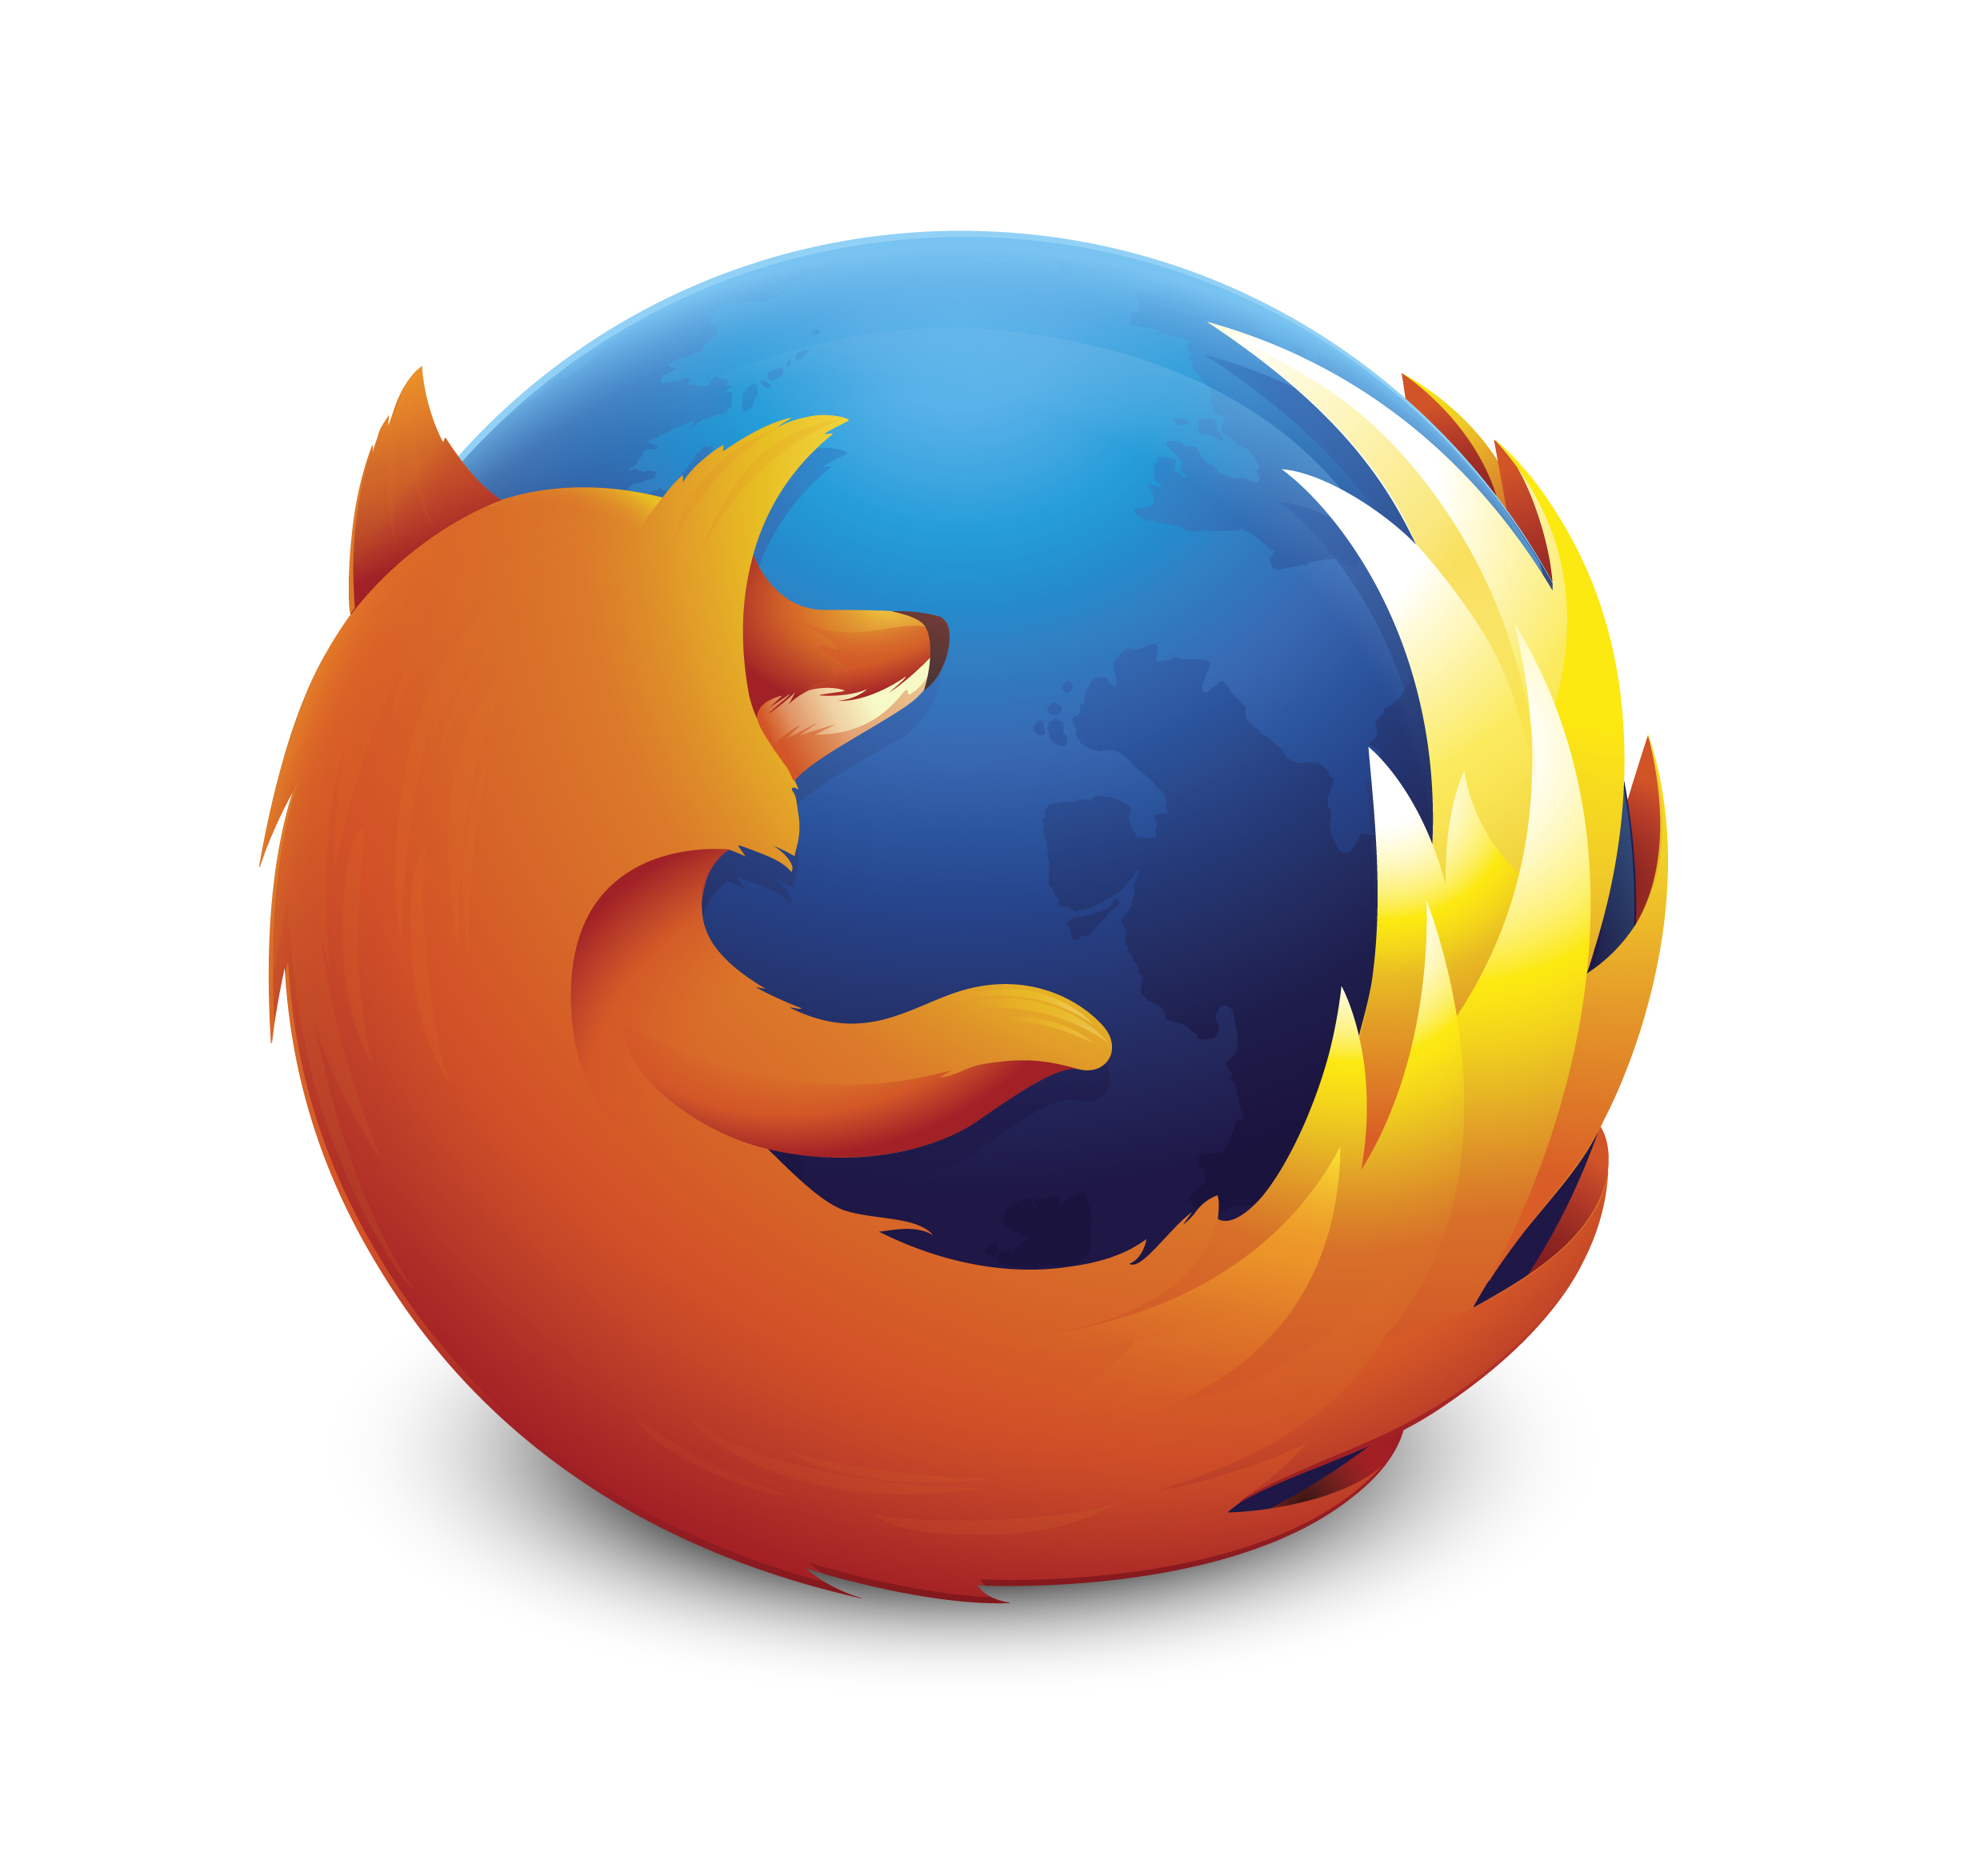 Engineering at Mozilla – Building Firefox with Georg Fritzsche